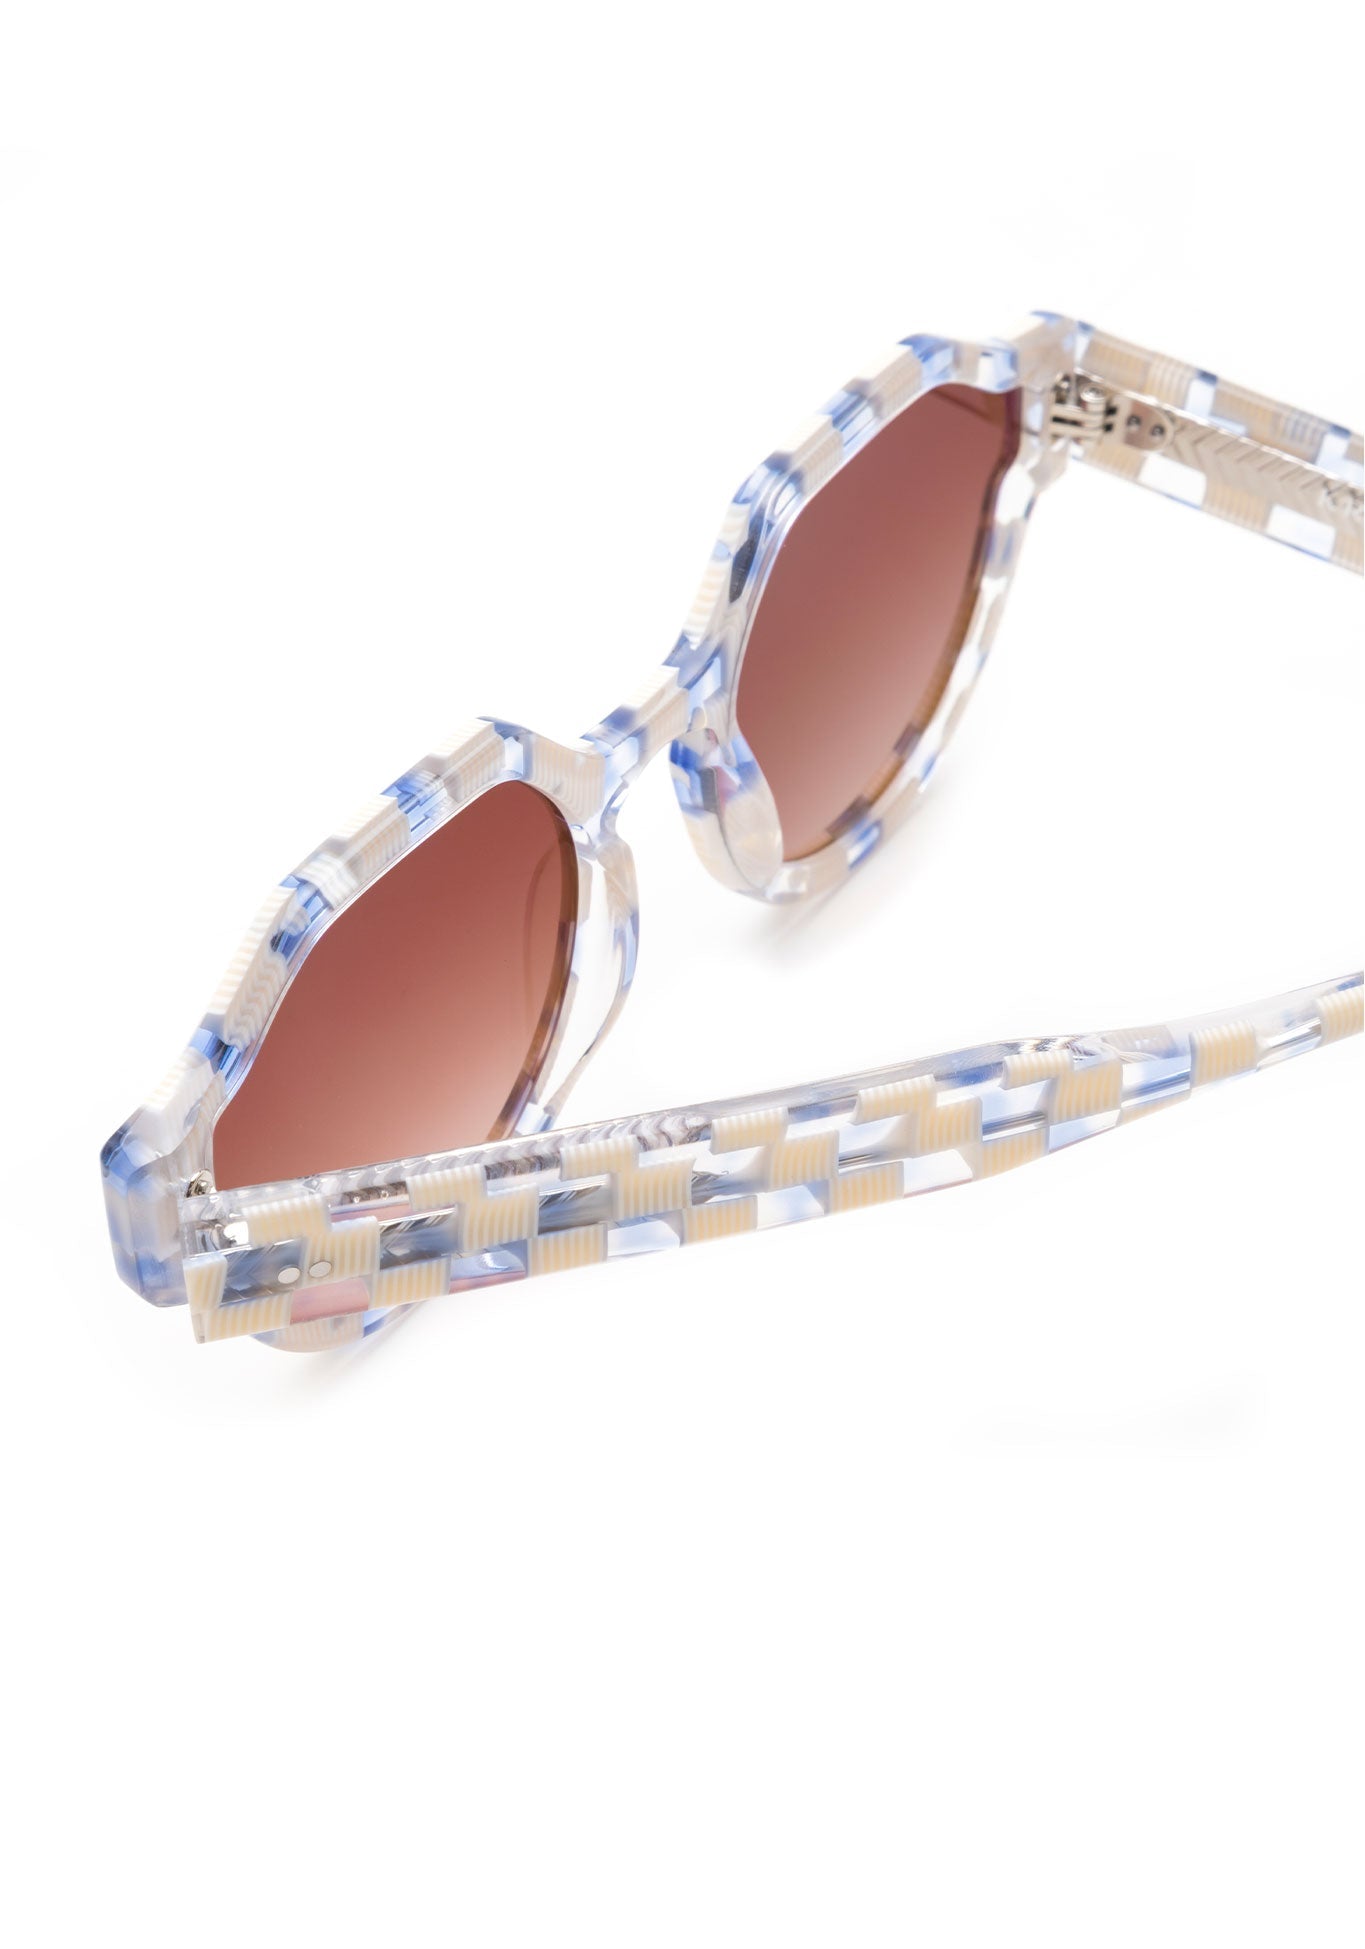 KREWE - ASTOR | Gingham Mirrored Handcrafted, luxury blue and white checkered sunglasses